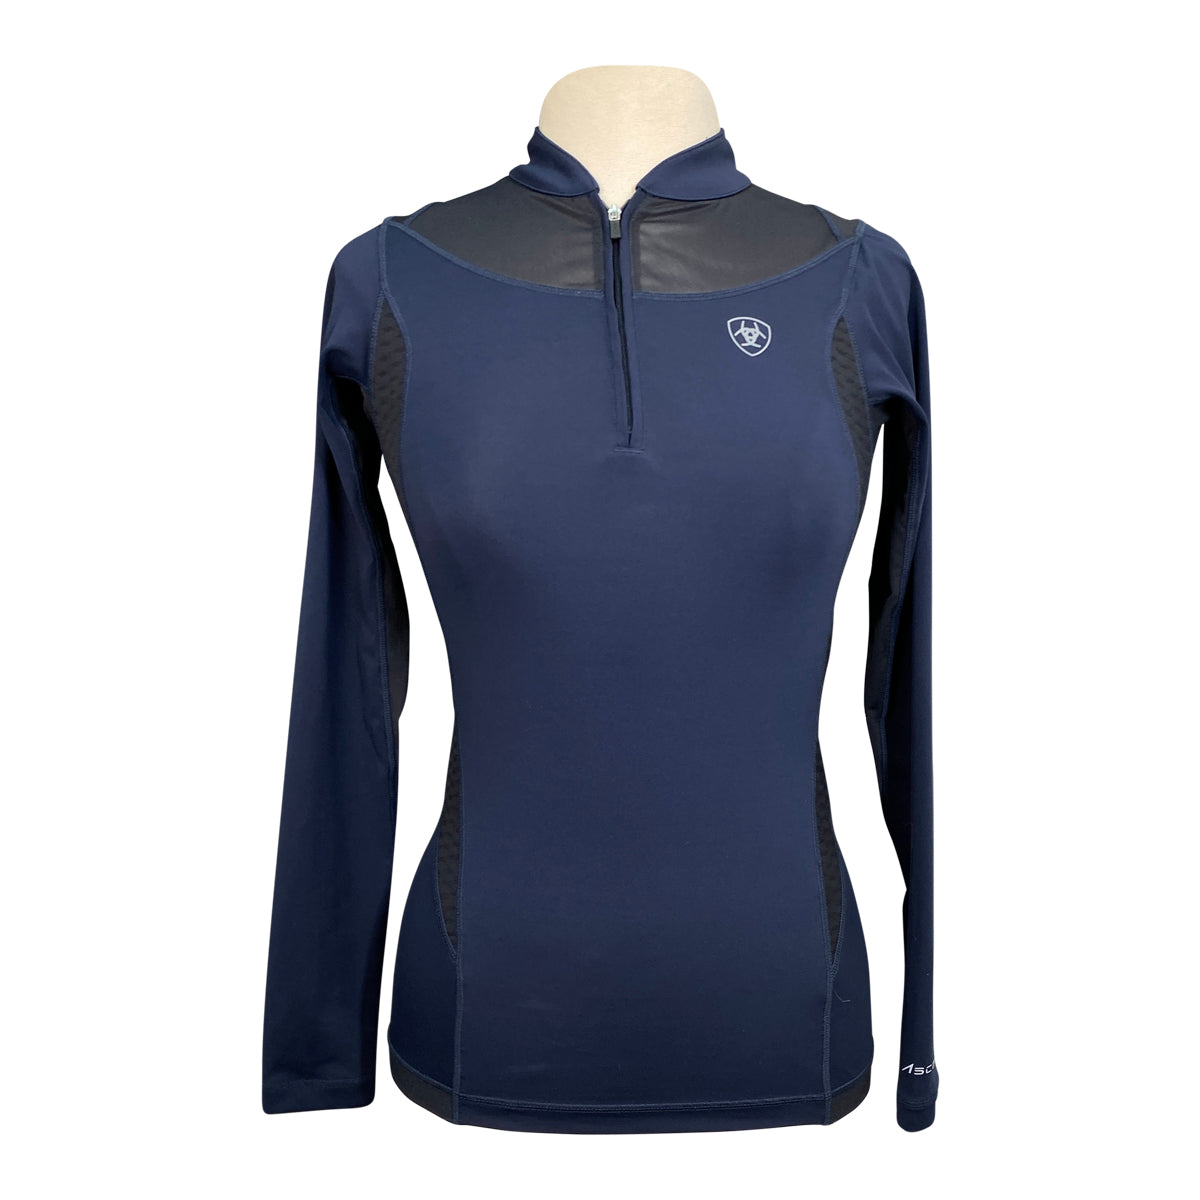 Ariat 'Ascent' Training Top in Navy